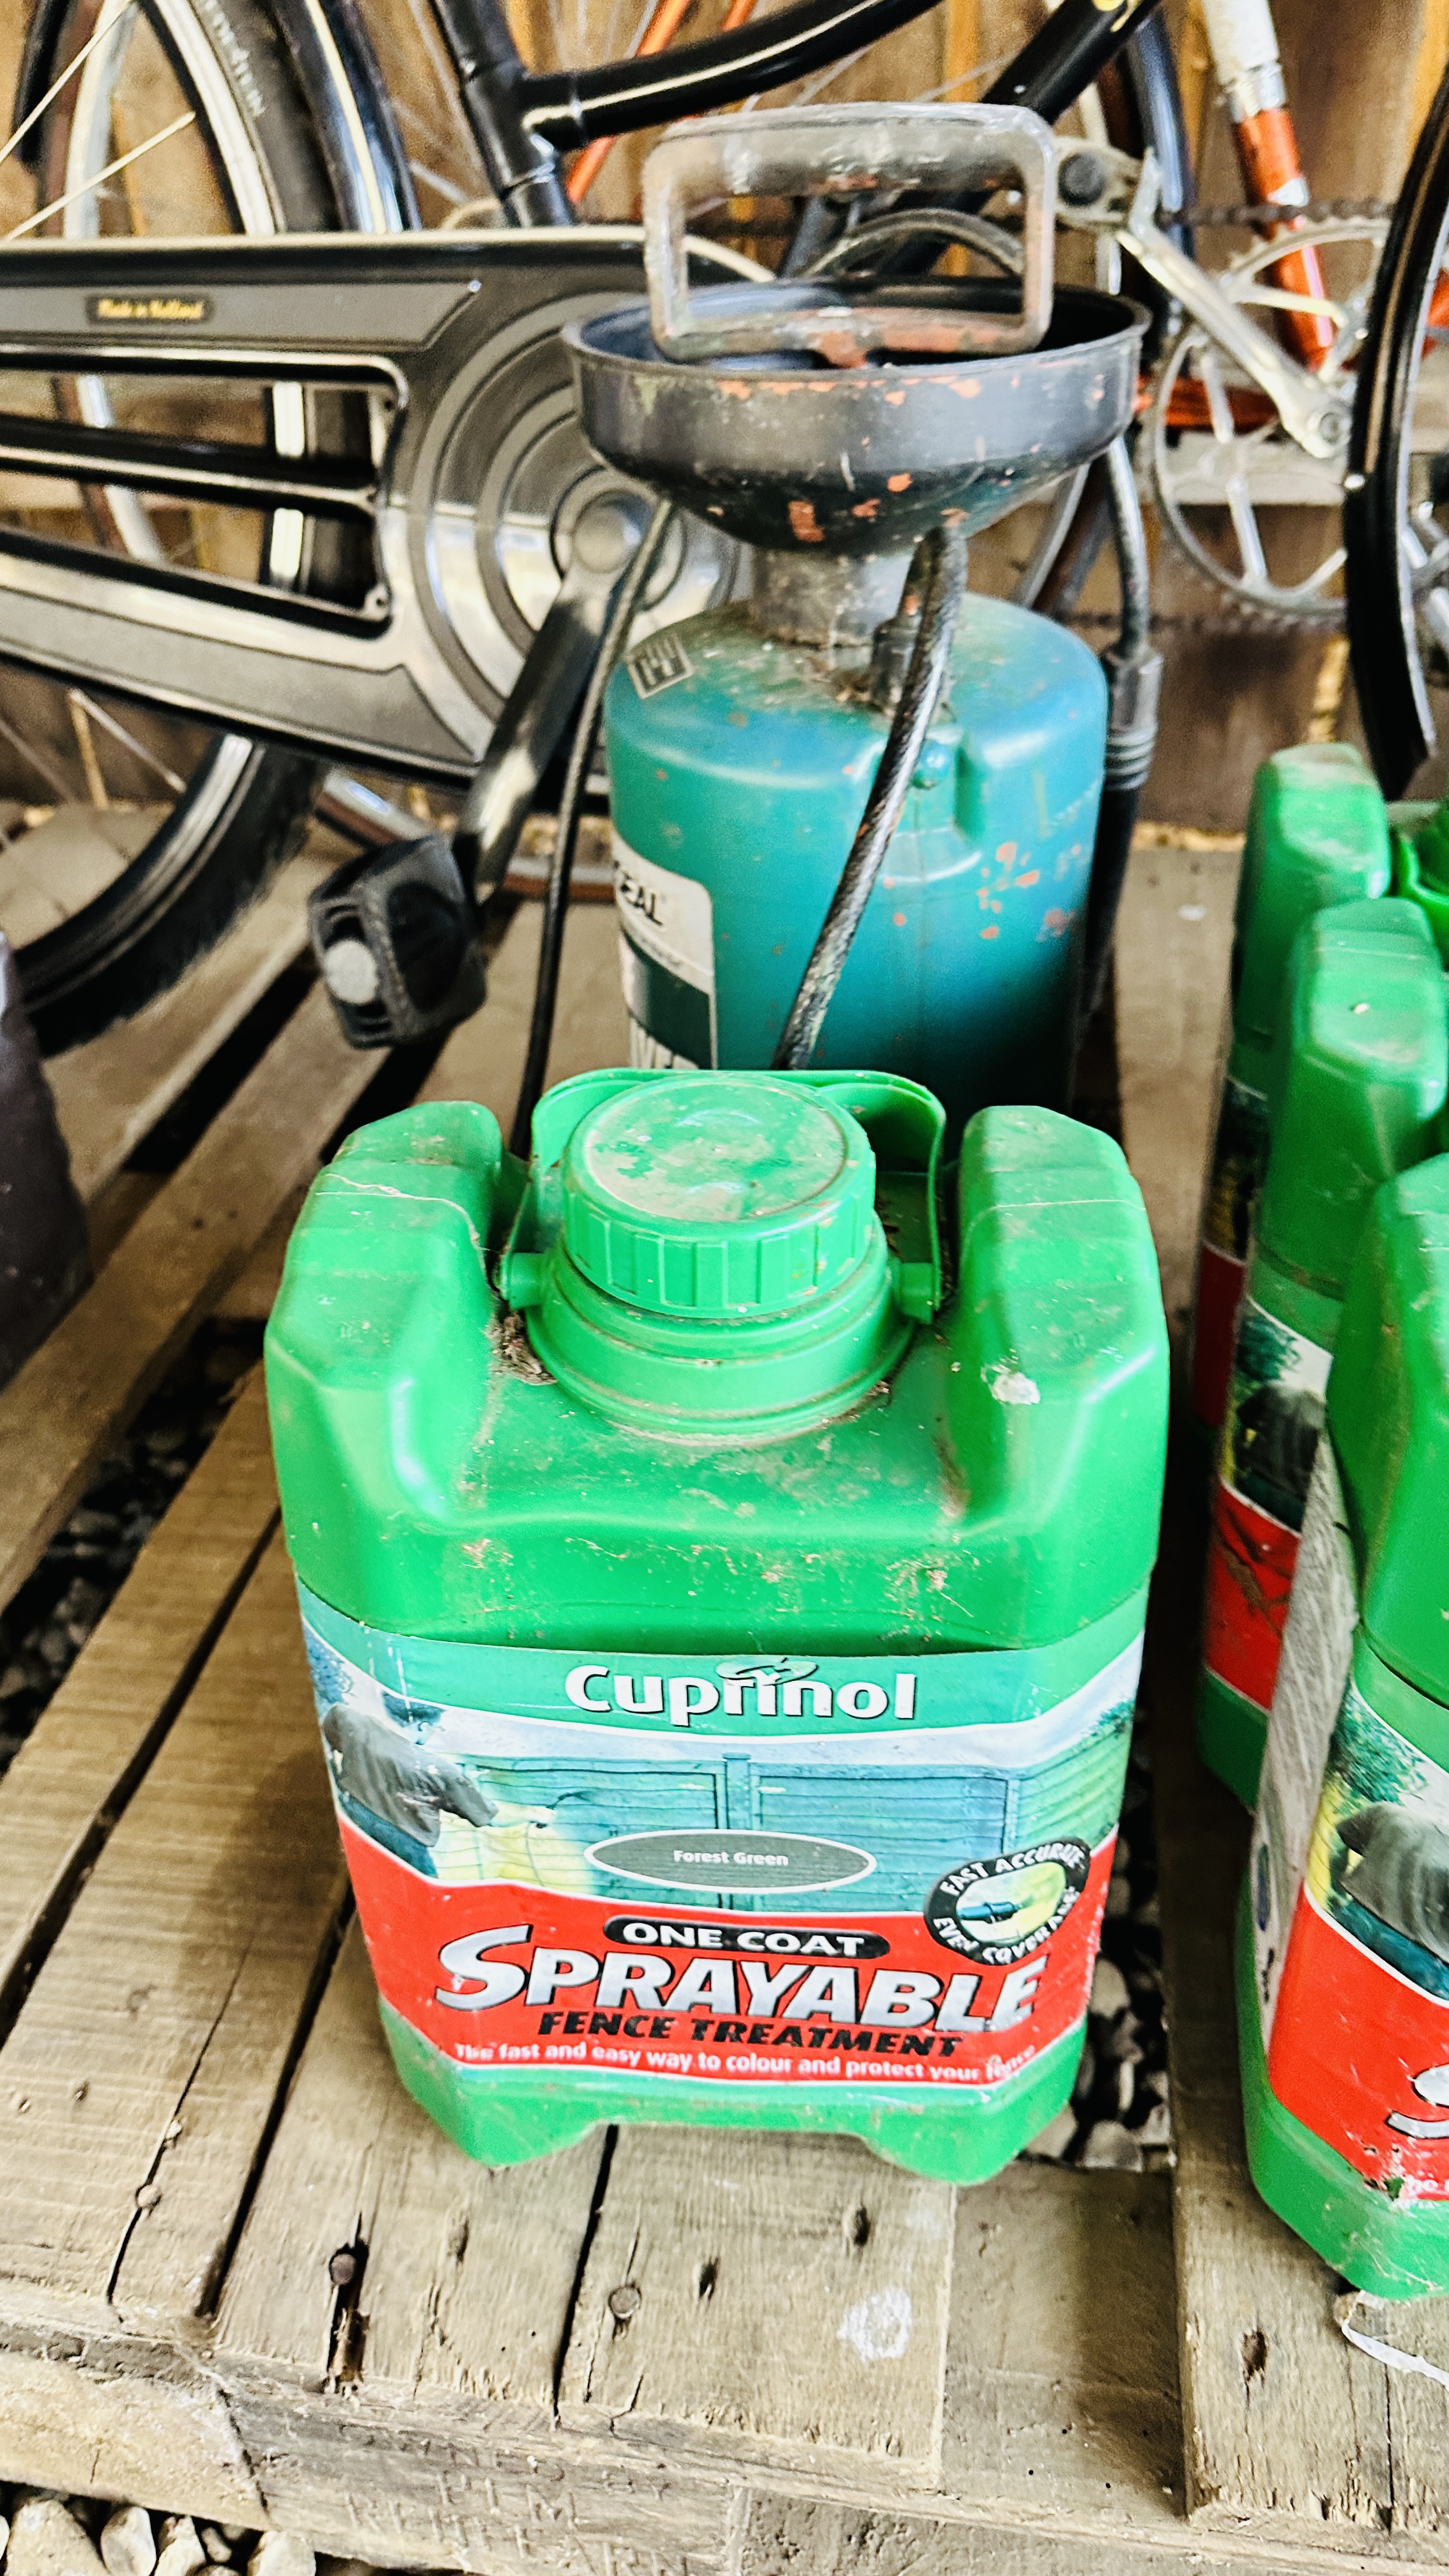 4 X 5 LITRES CUPRINOL "FOREST GREEN" SPRAYABLE FENCE TREATMENT PLUS RONSEAL FENCE SPRAYER. - Image 3 of 3